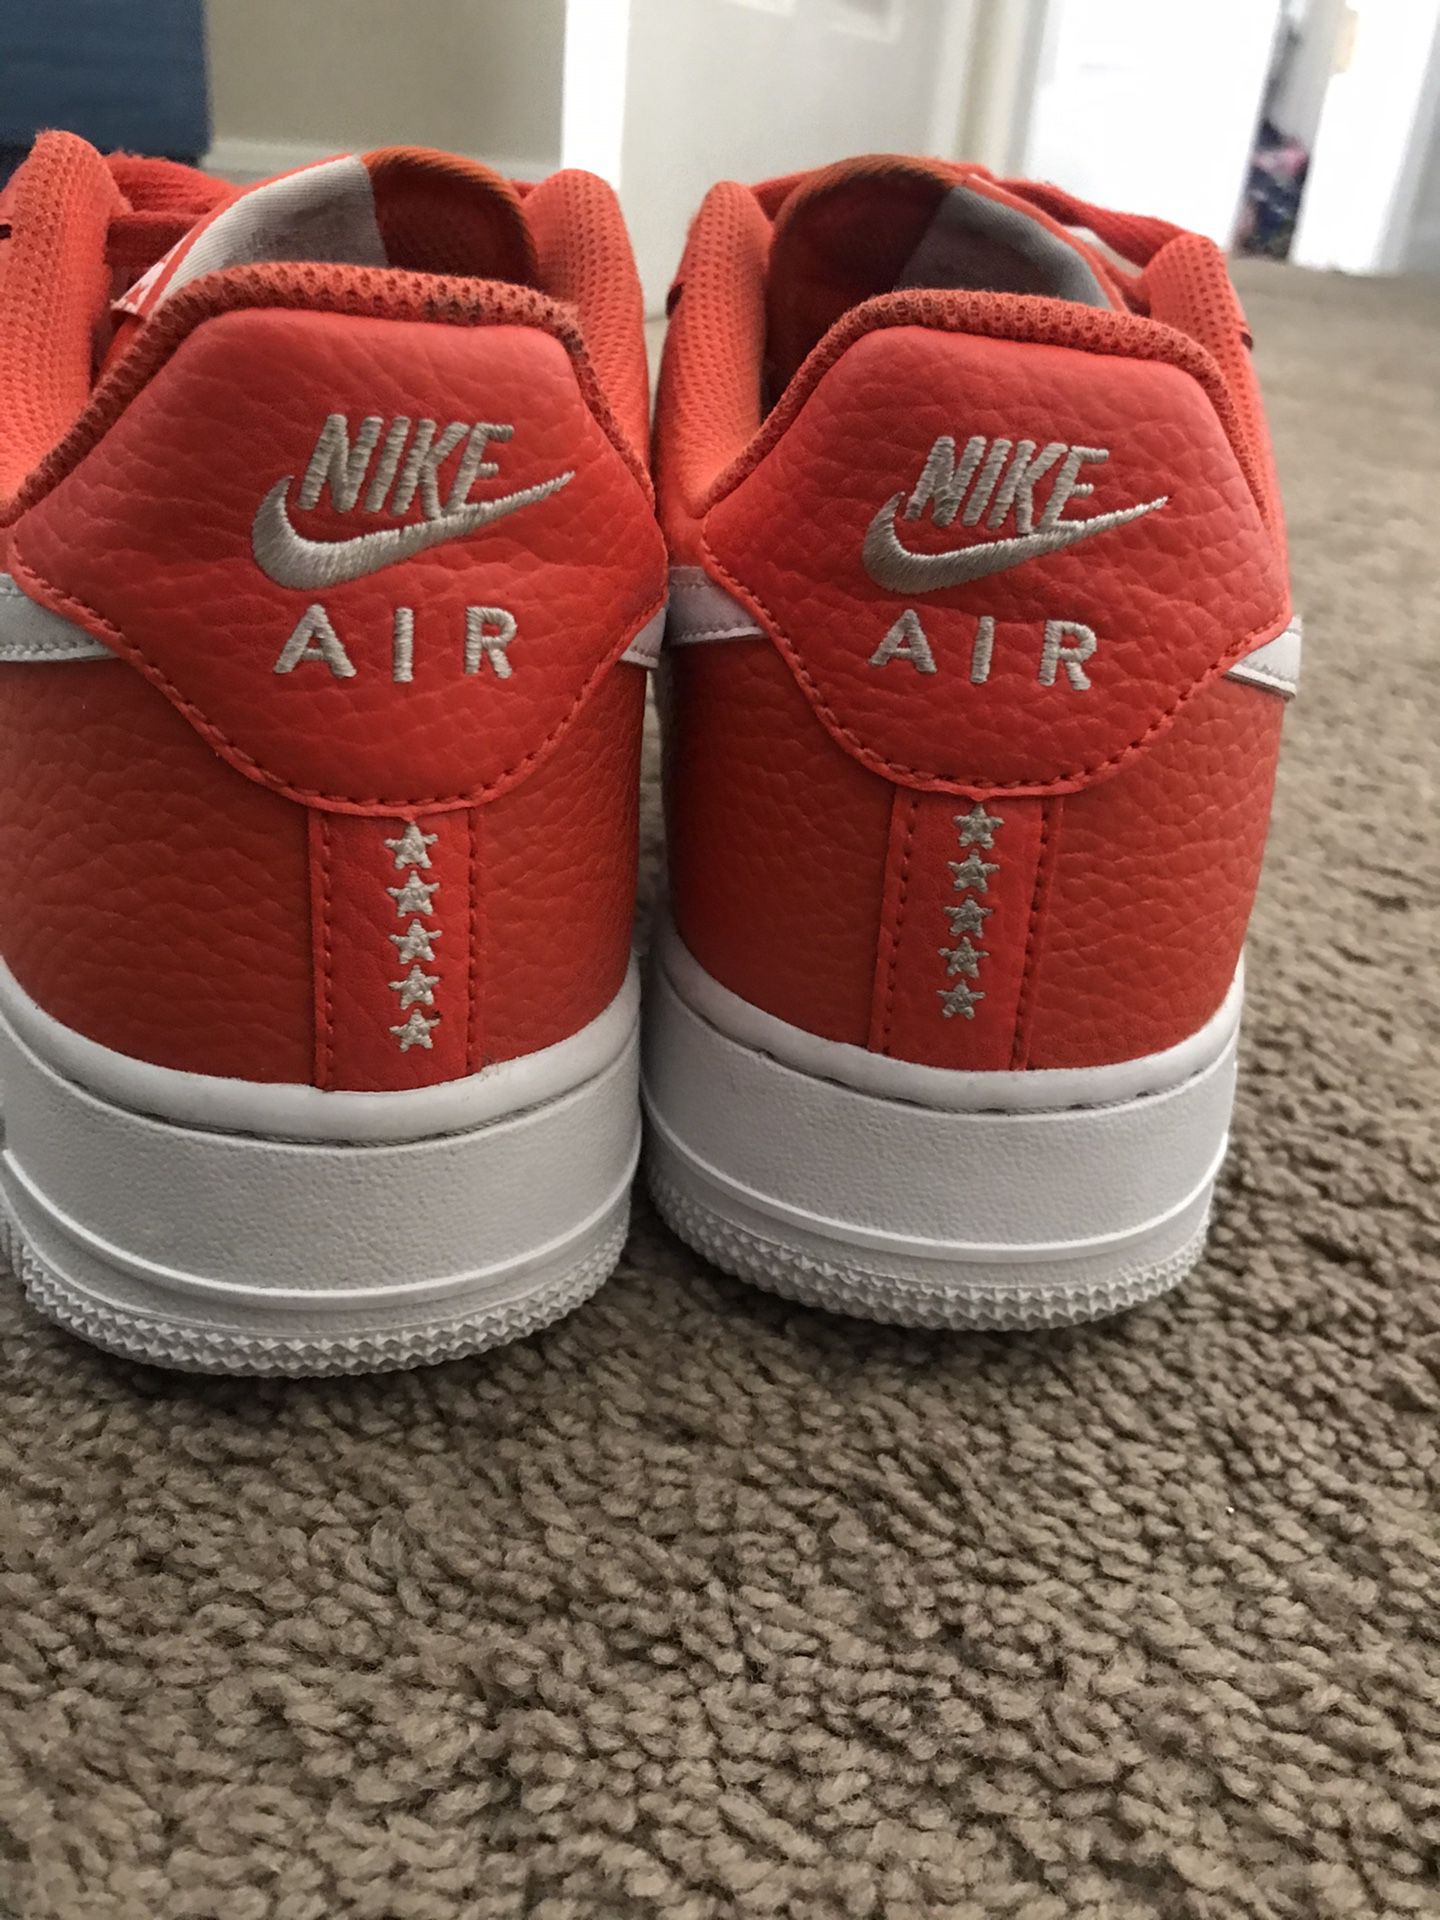 Air Force 1 worn 1 size 8 1/2 good condition very clean